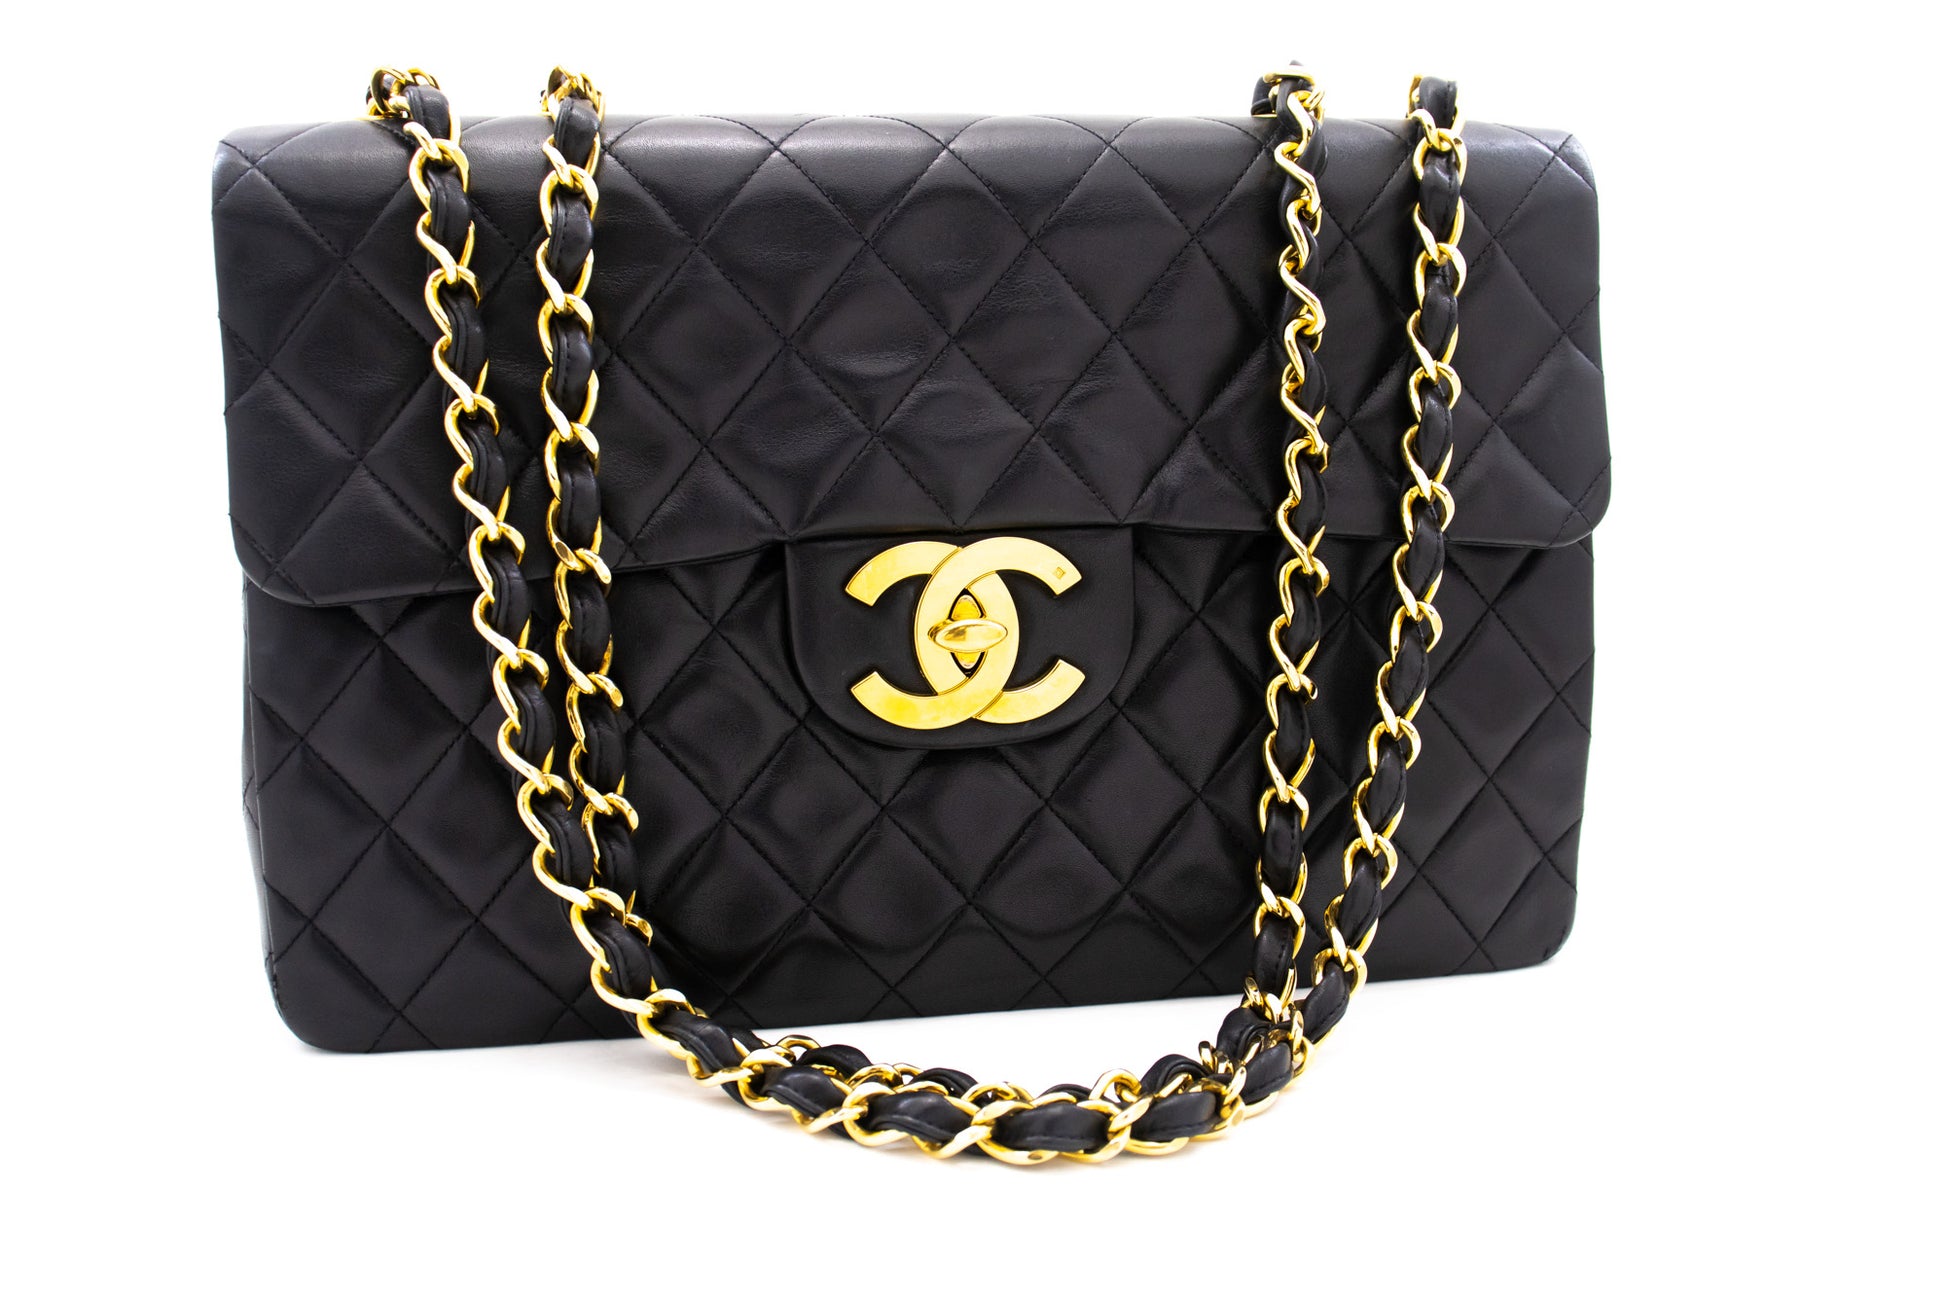 CHANEL Black Extra Large Bags & Handbags for Women for sale